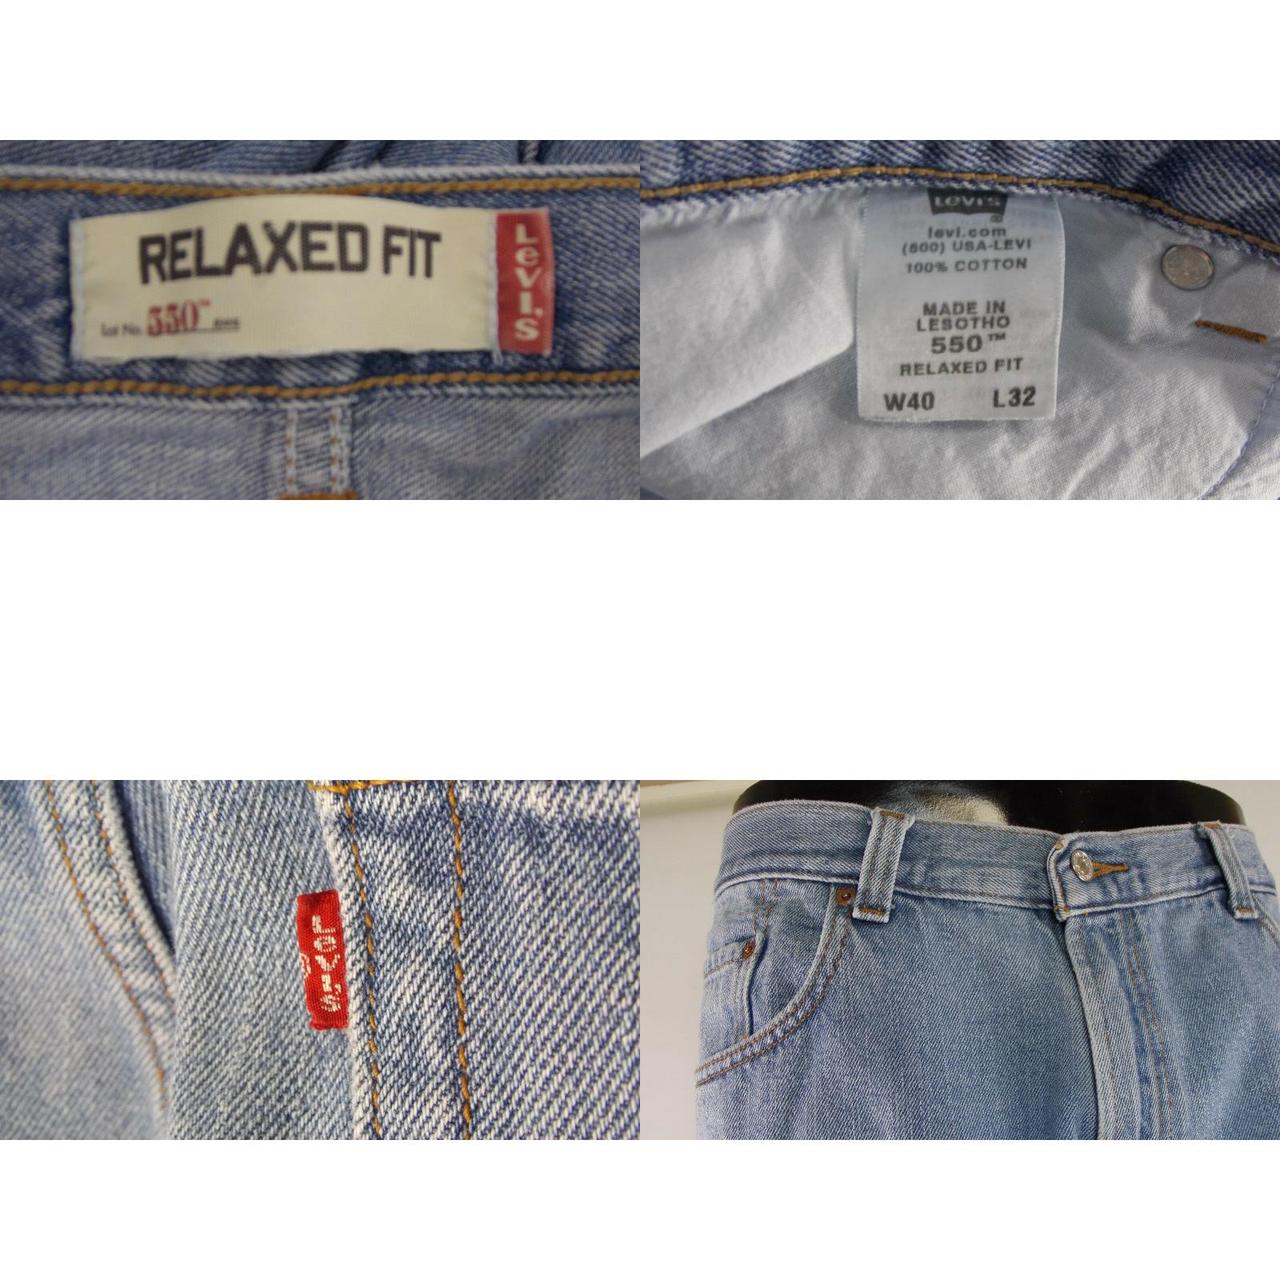 Product Image 4 - Levi's 550 Relaxed Fit Men's